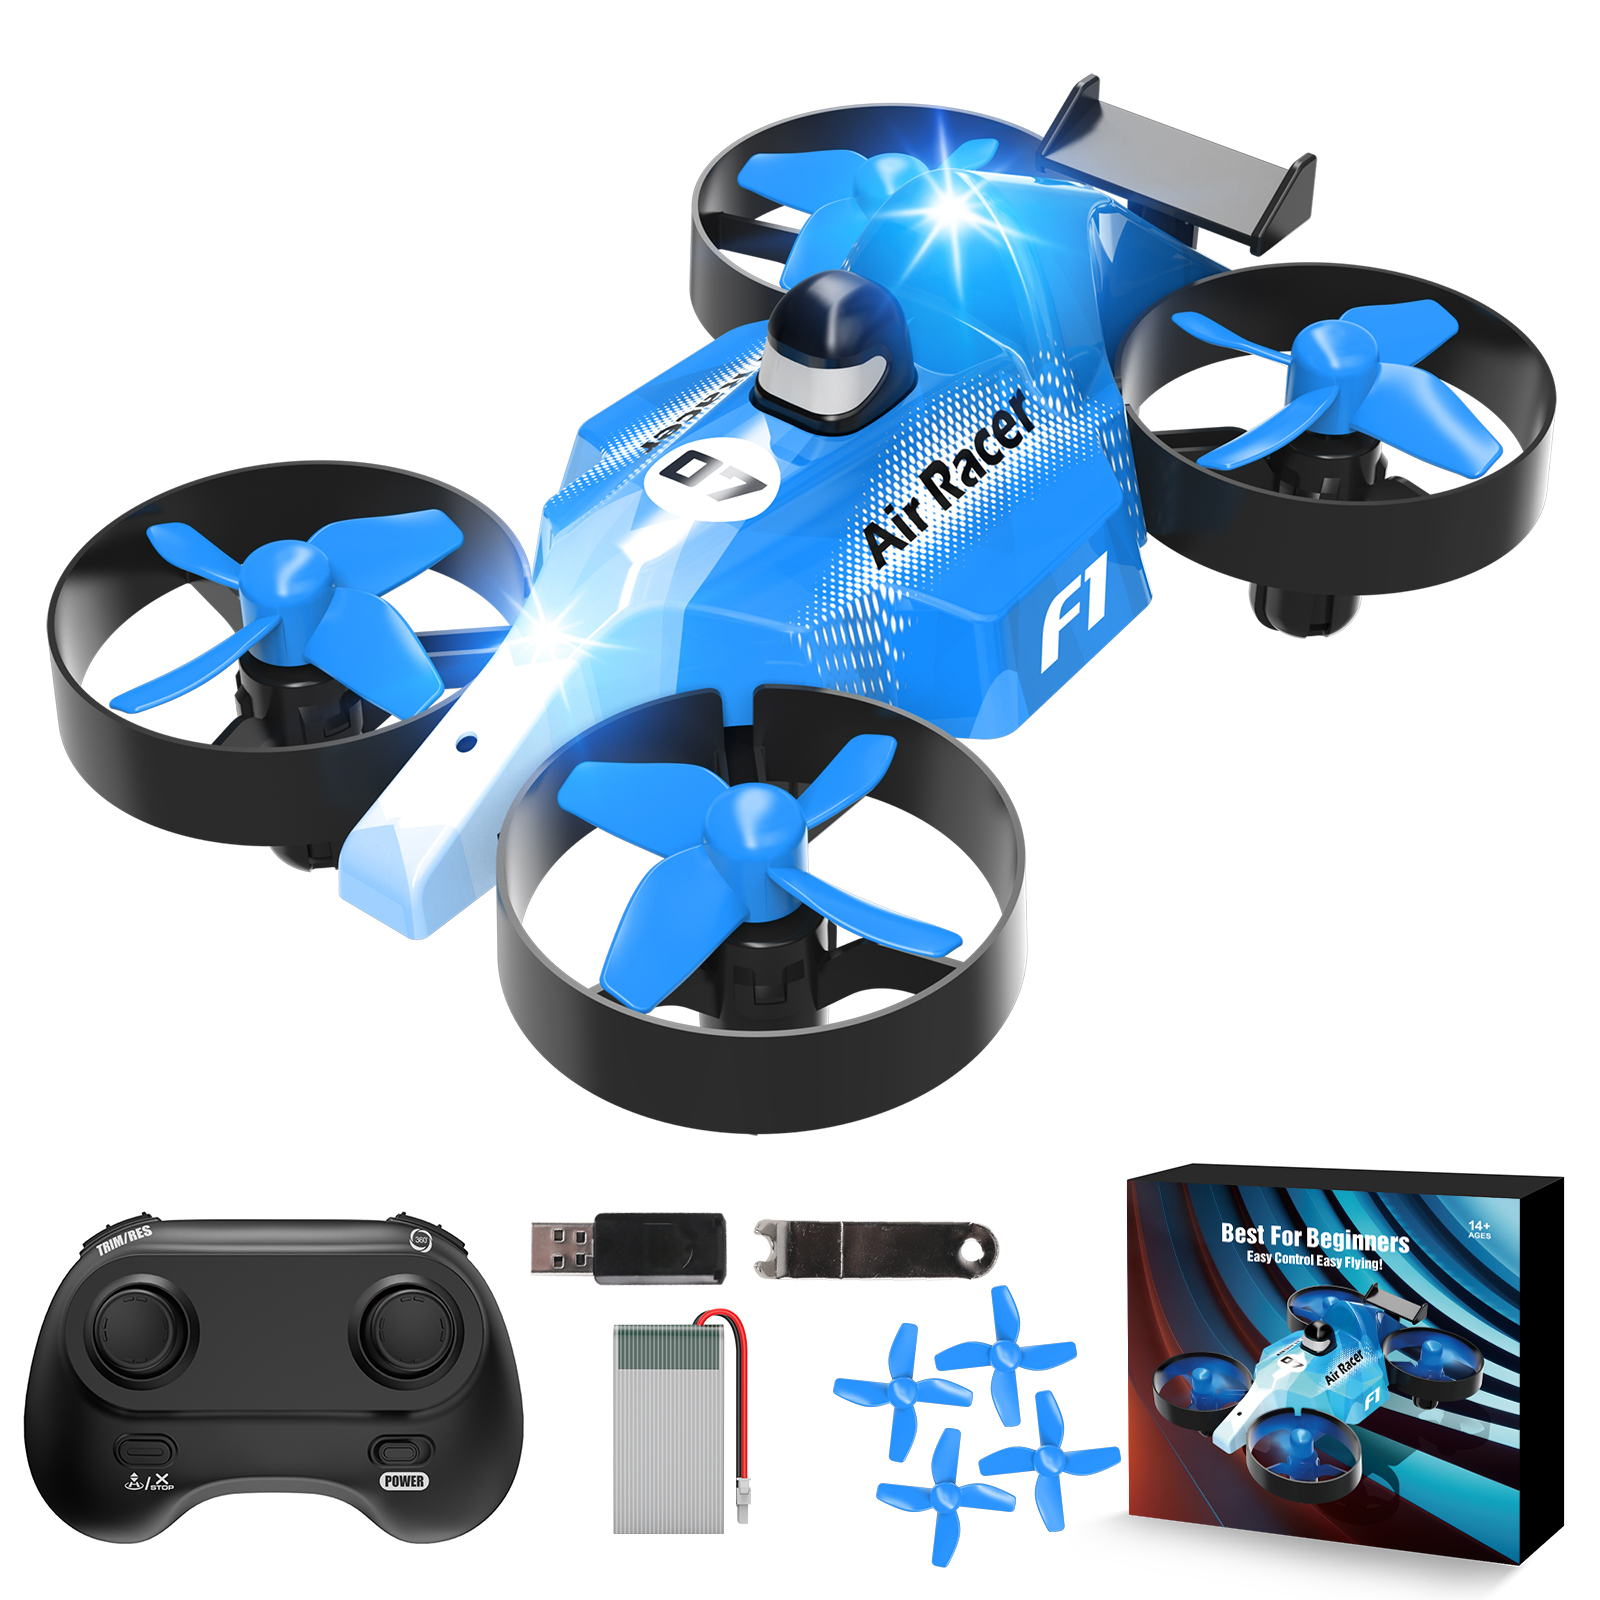 2-in-1 Land and Air Drone